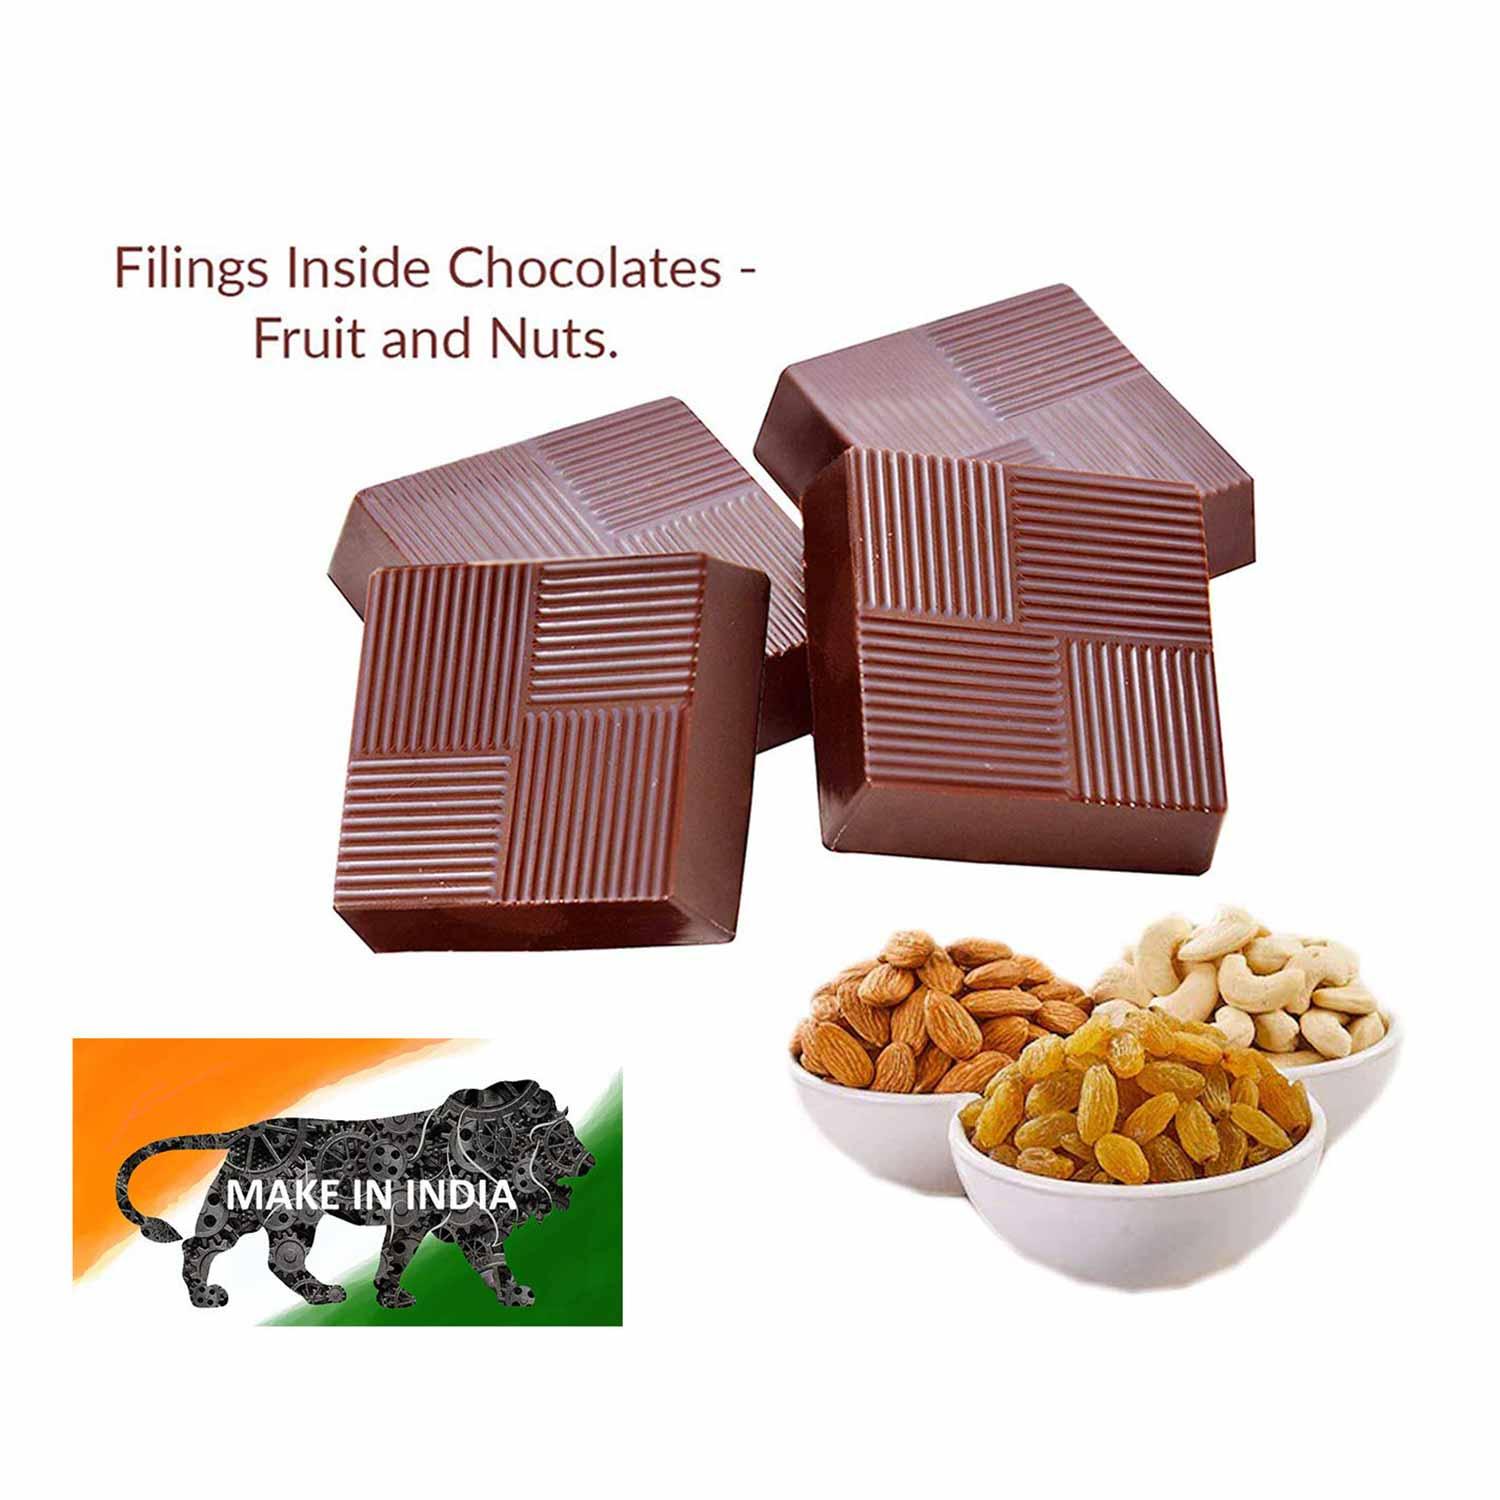 Photo printed on wrapper and box of chocolates - Choco Manual ART